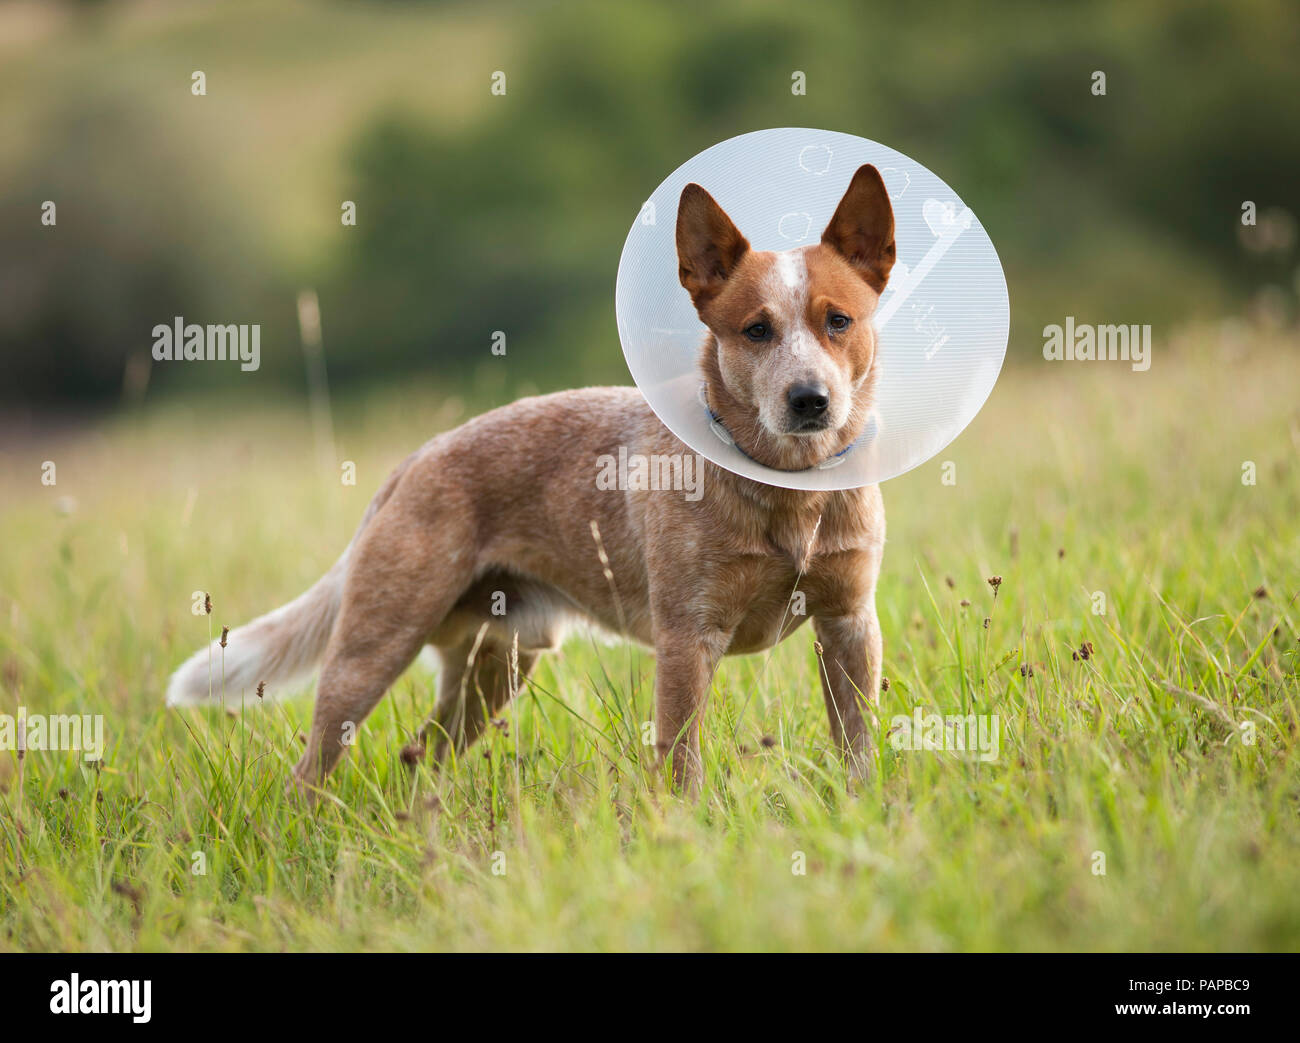 Australian Cattle Dog wearing an Elizabethan collar to prevent the animal from licking or biting during healing of wounds. Germany Stock Photo